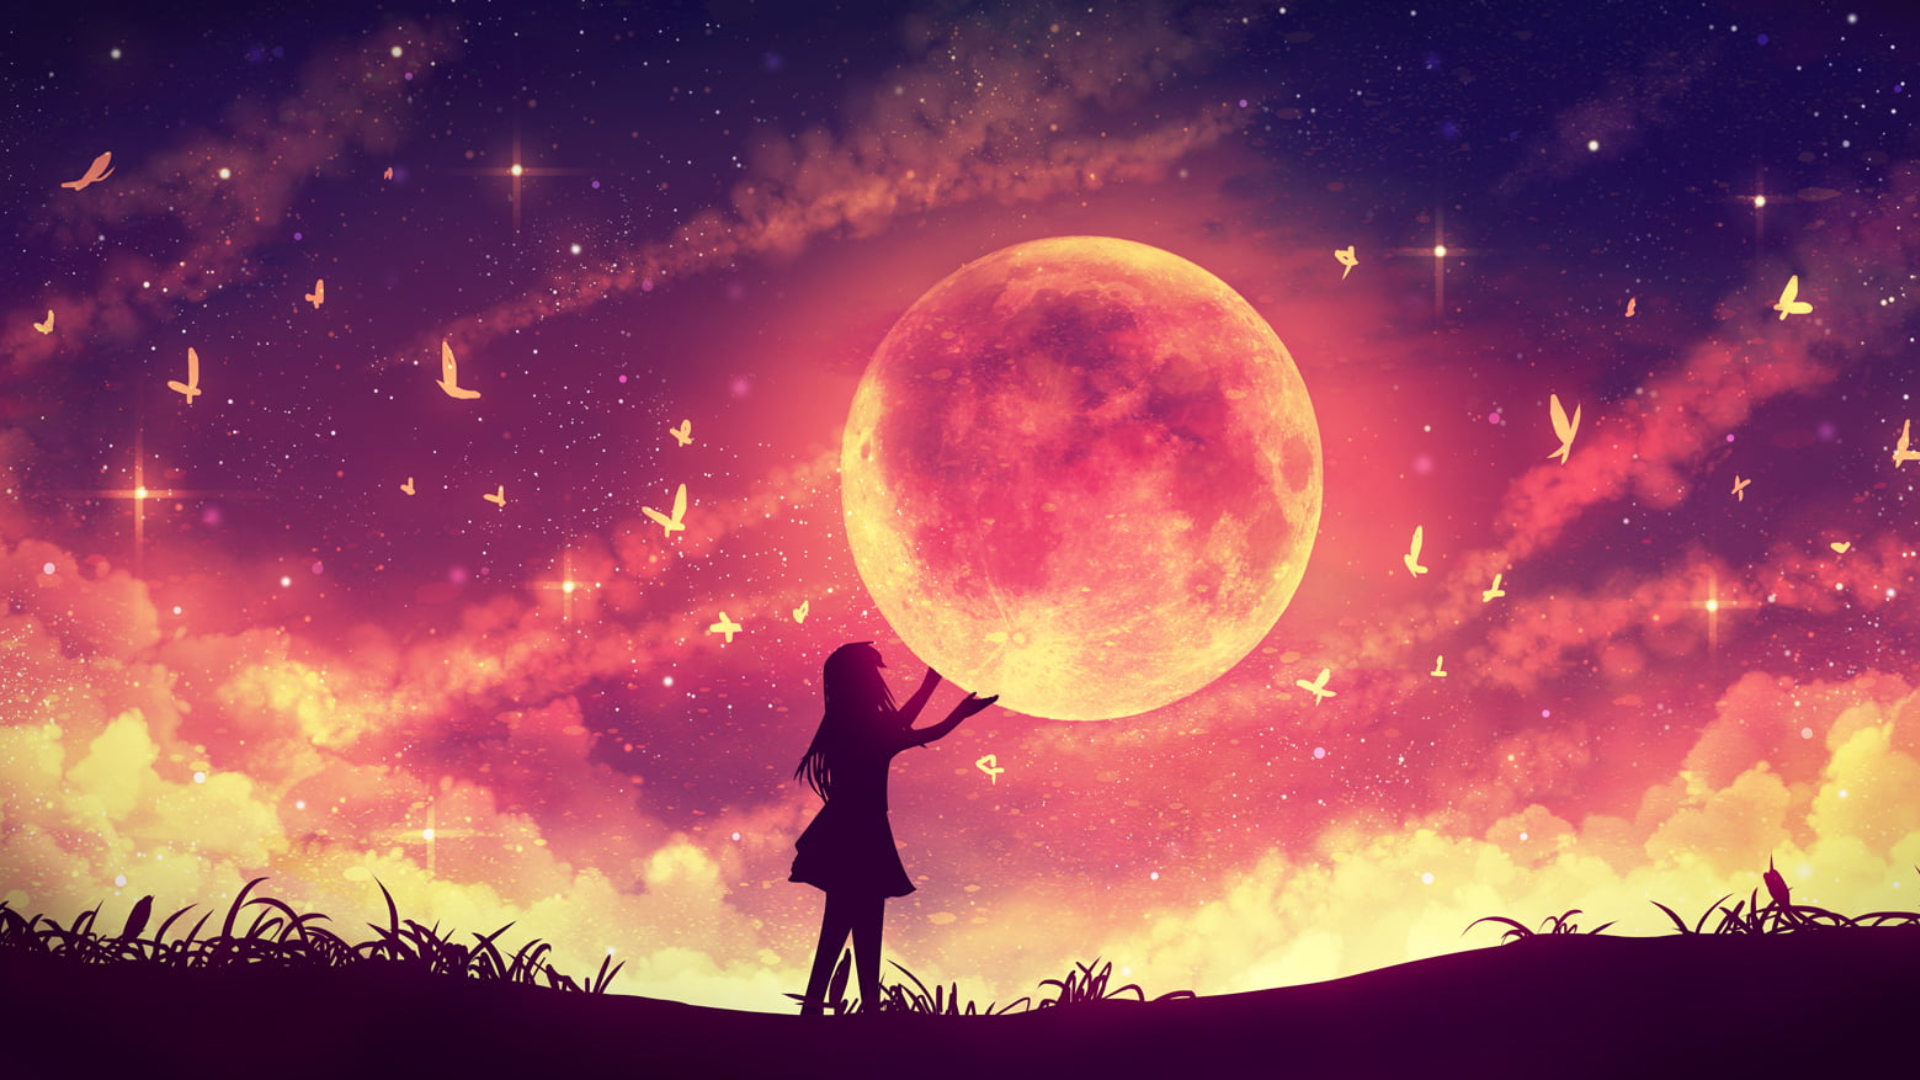 Dream symbols represented by the moon